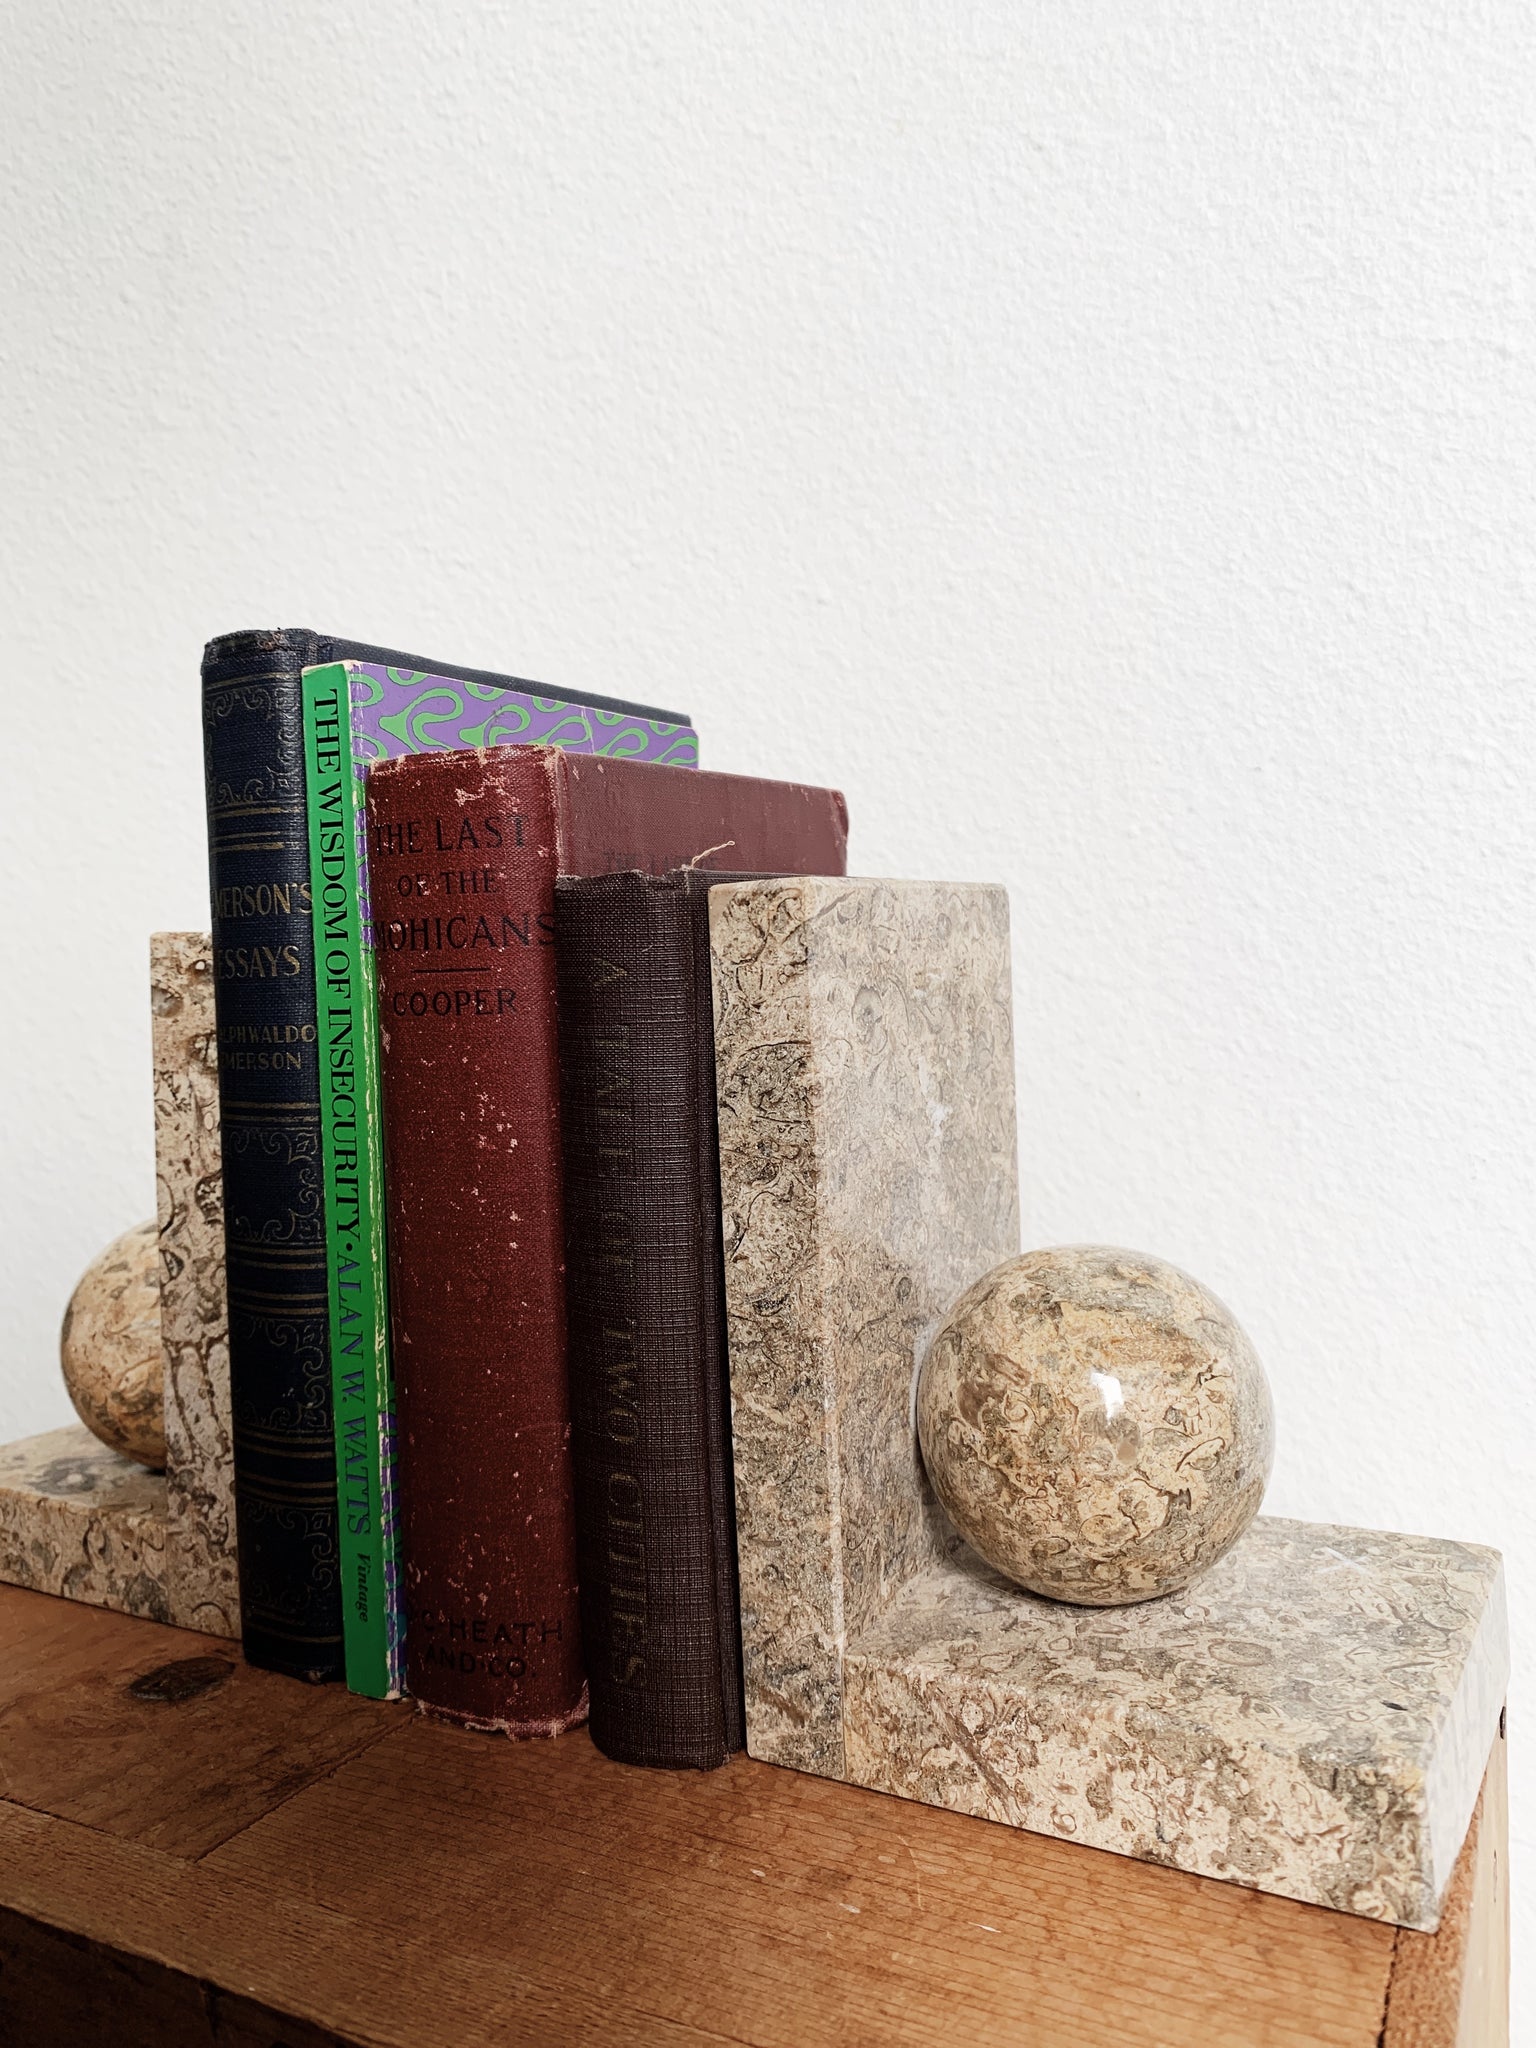 Vintage Marble Bookends